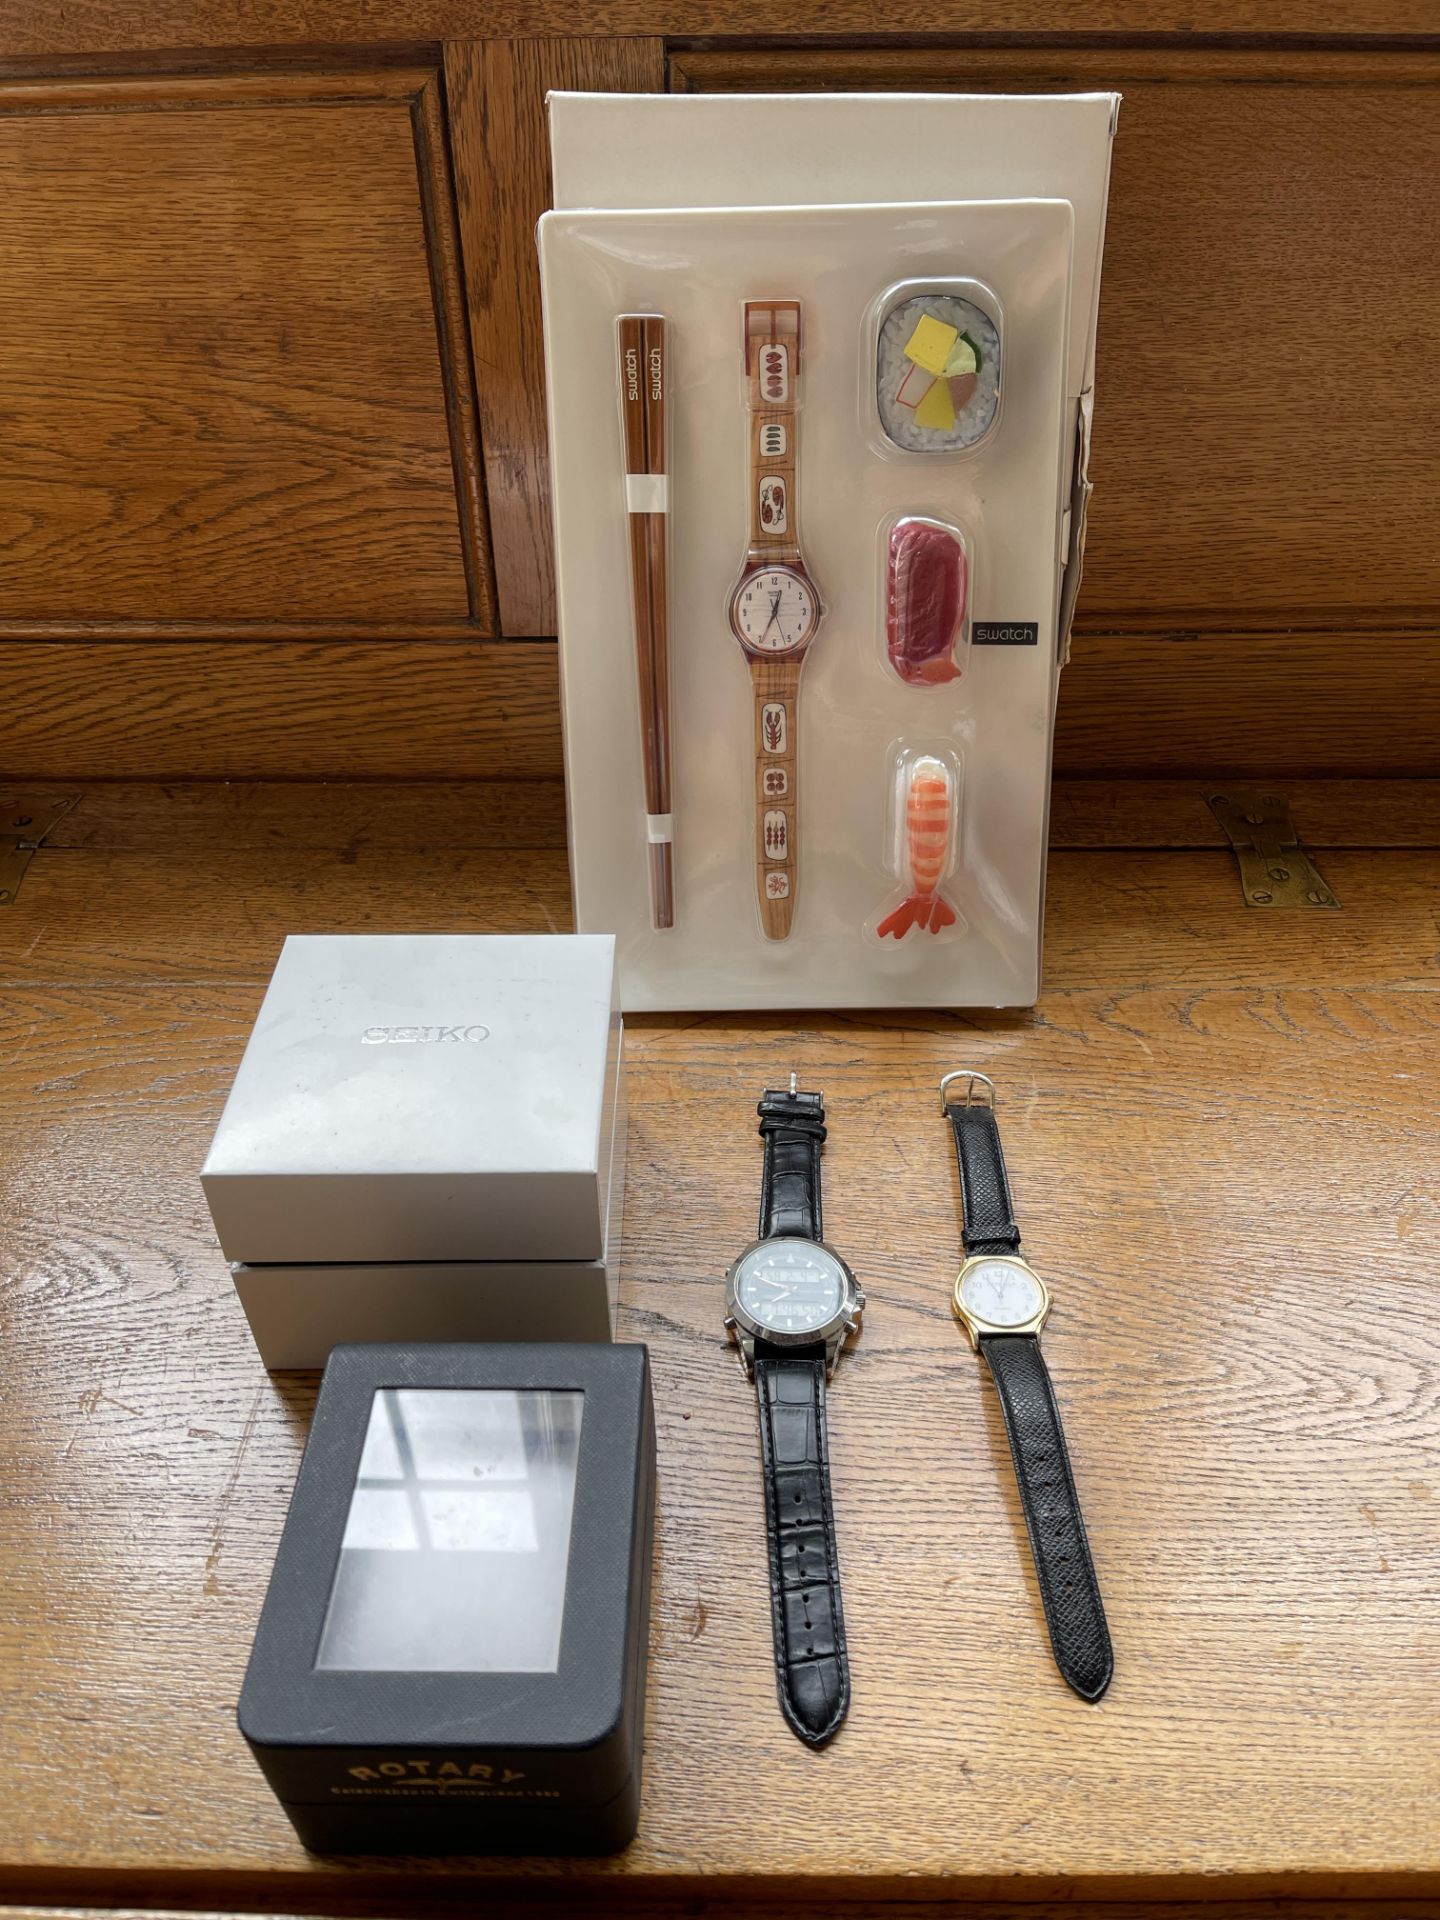 LOT OF WATCHES, BRAND NEW SEALED SUSHI PLATE SWATCH WATCH IN BOX